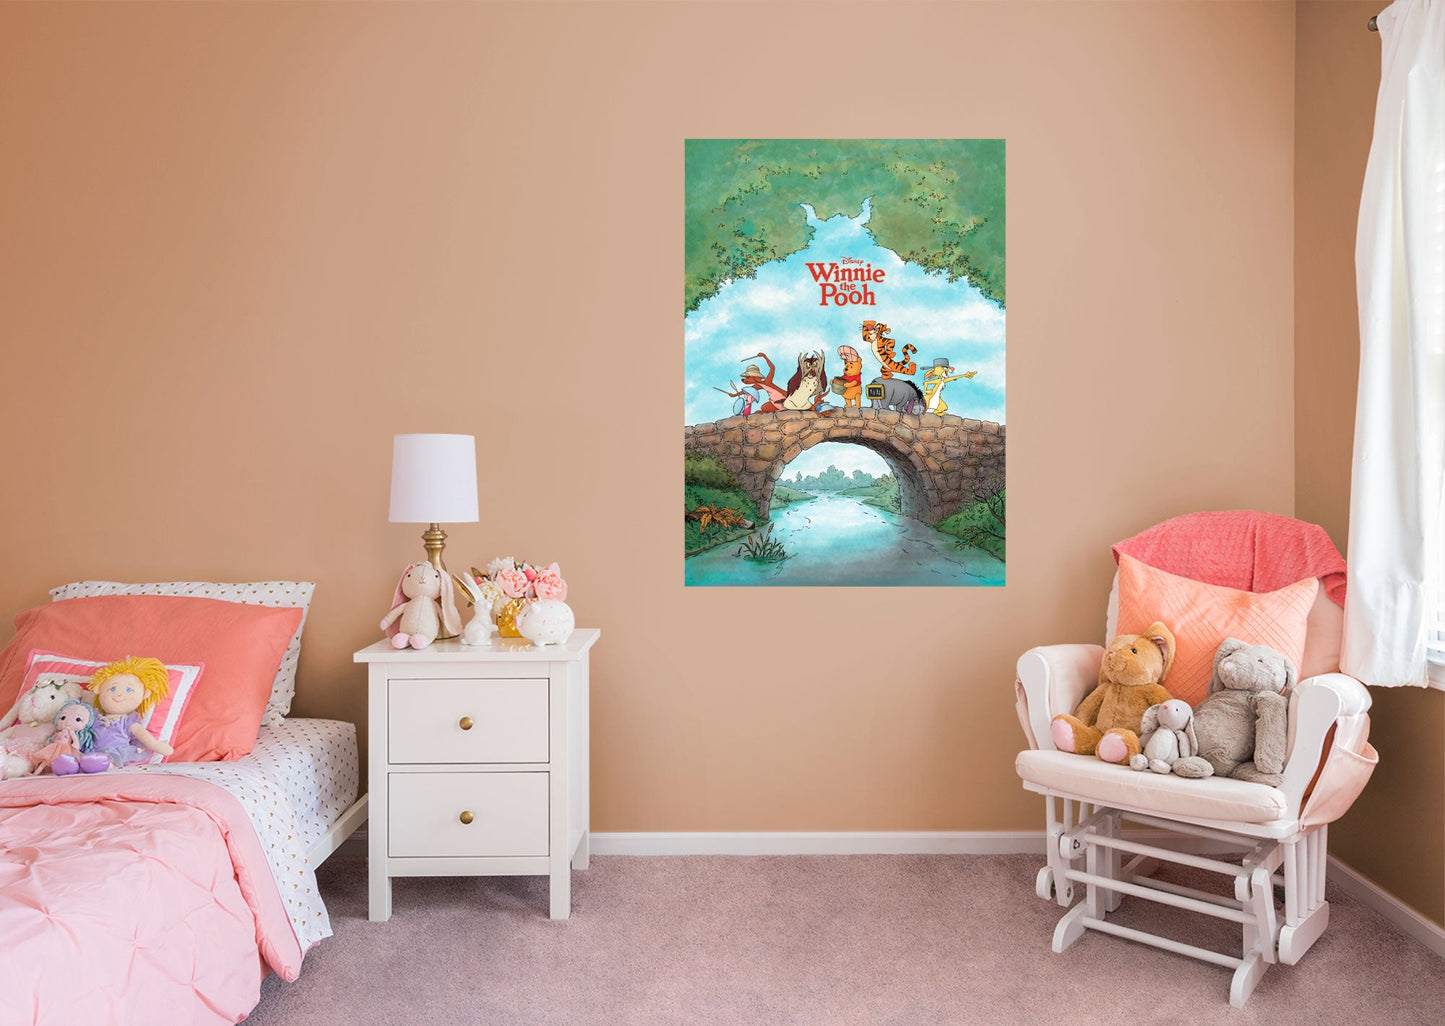 Winnie The Pooh:  Movie Poster Mural        - Officially Licensed Disney Removable Wall   Adhesive Decal